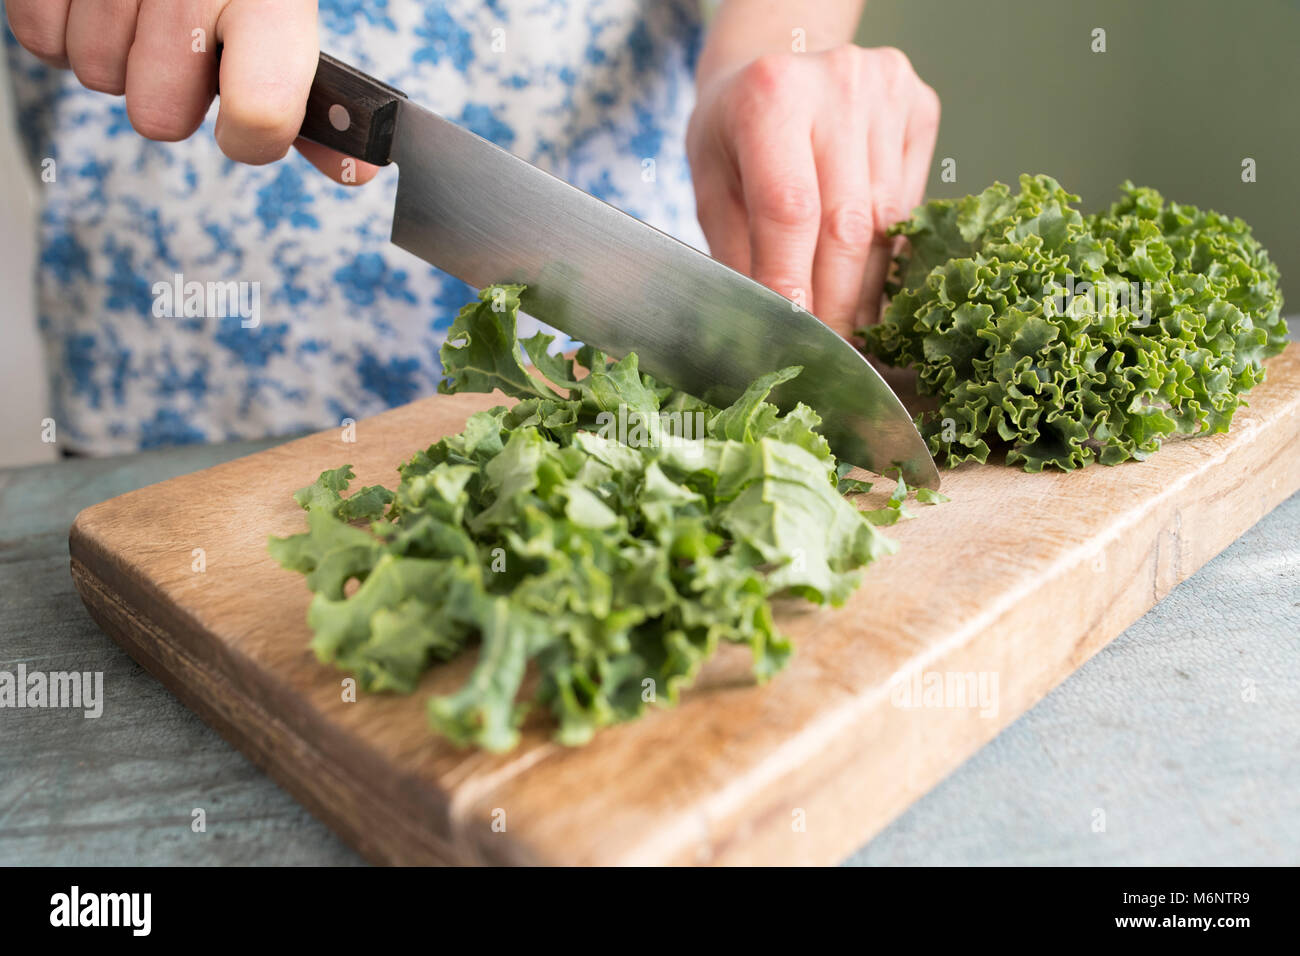 Close Up Of Woman Preparing Kale On Chopping Board Stock Photo